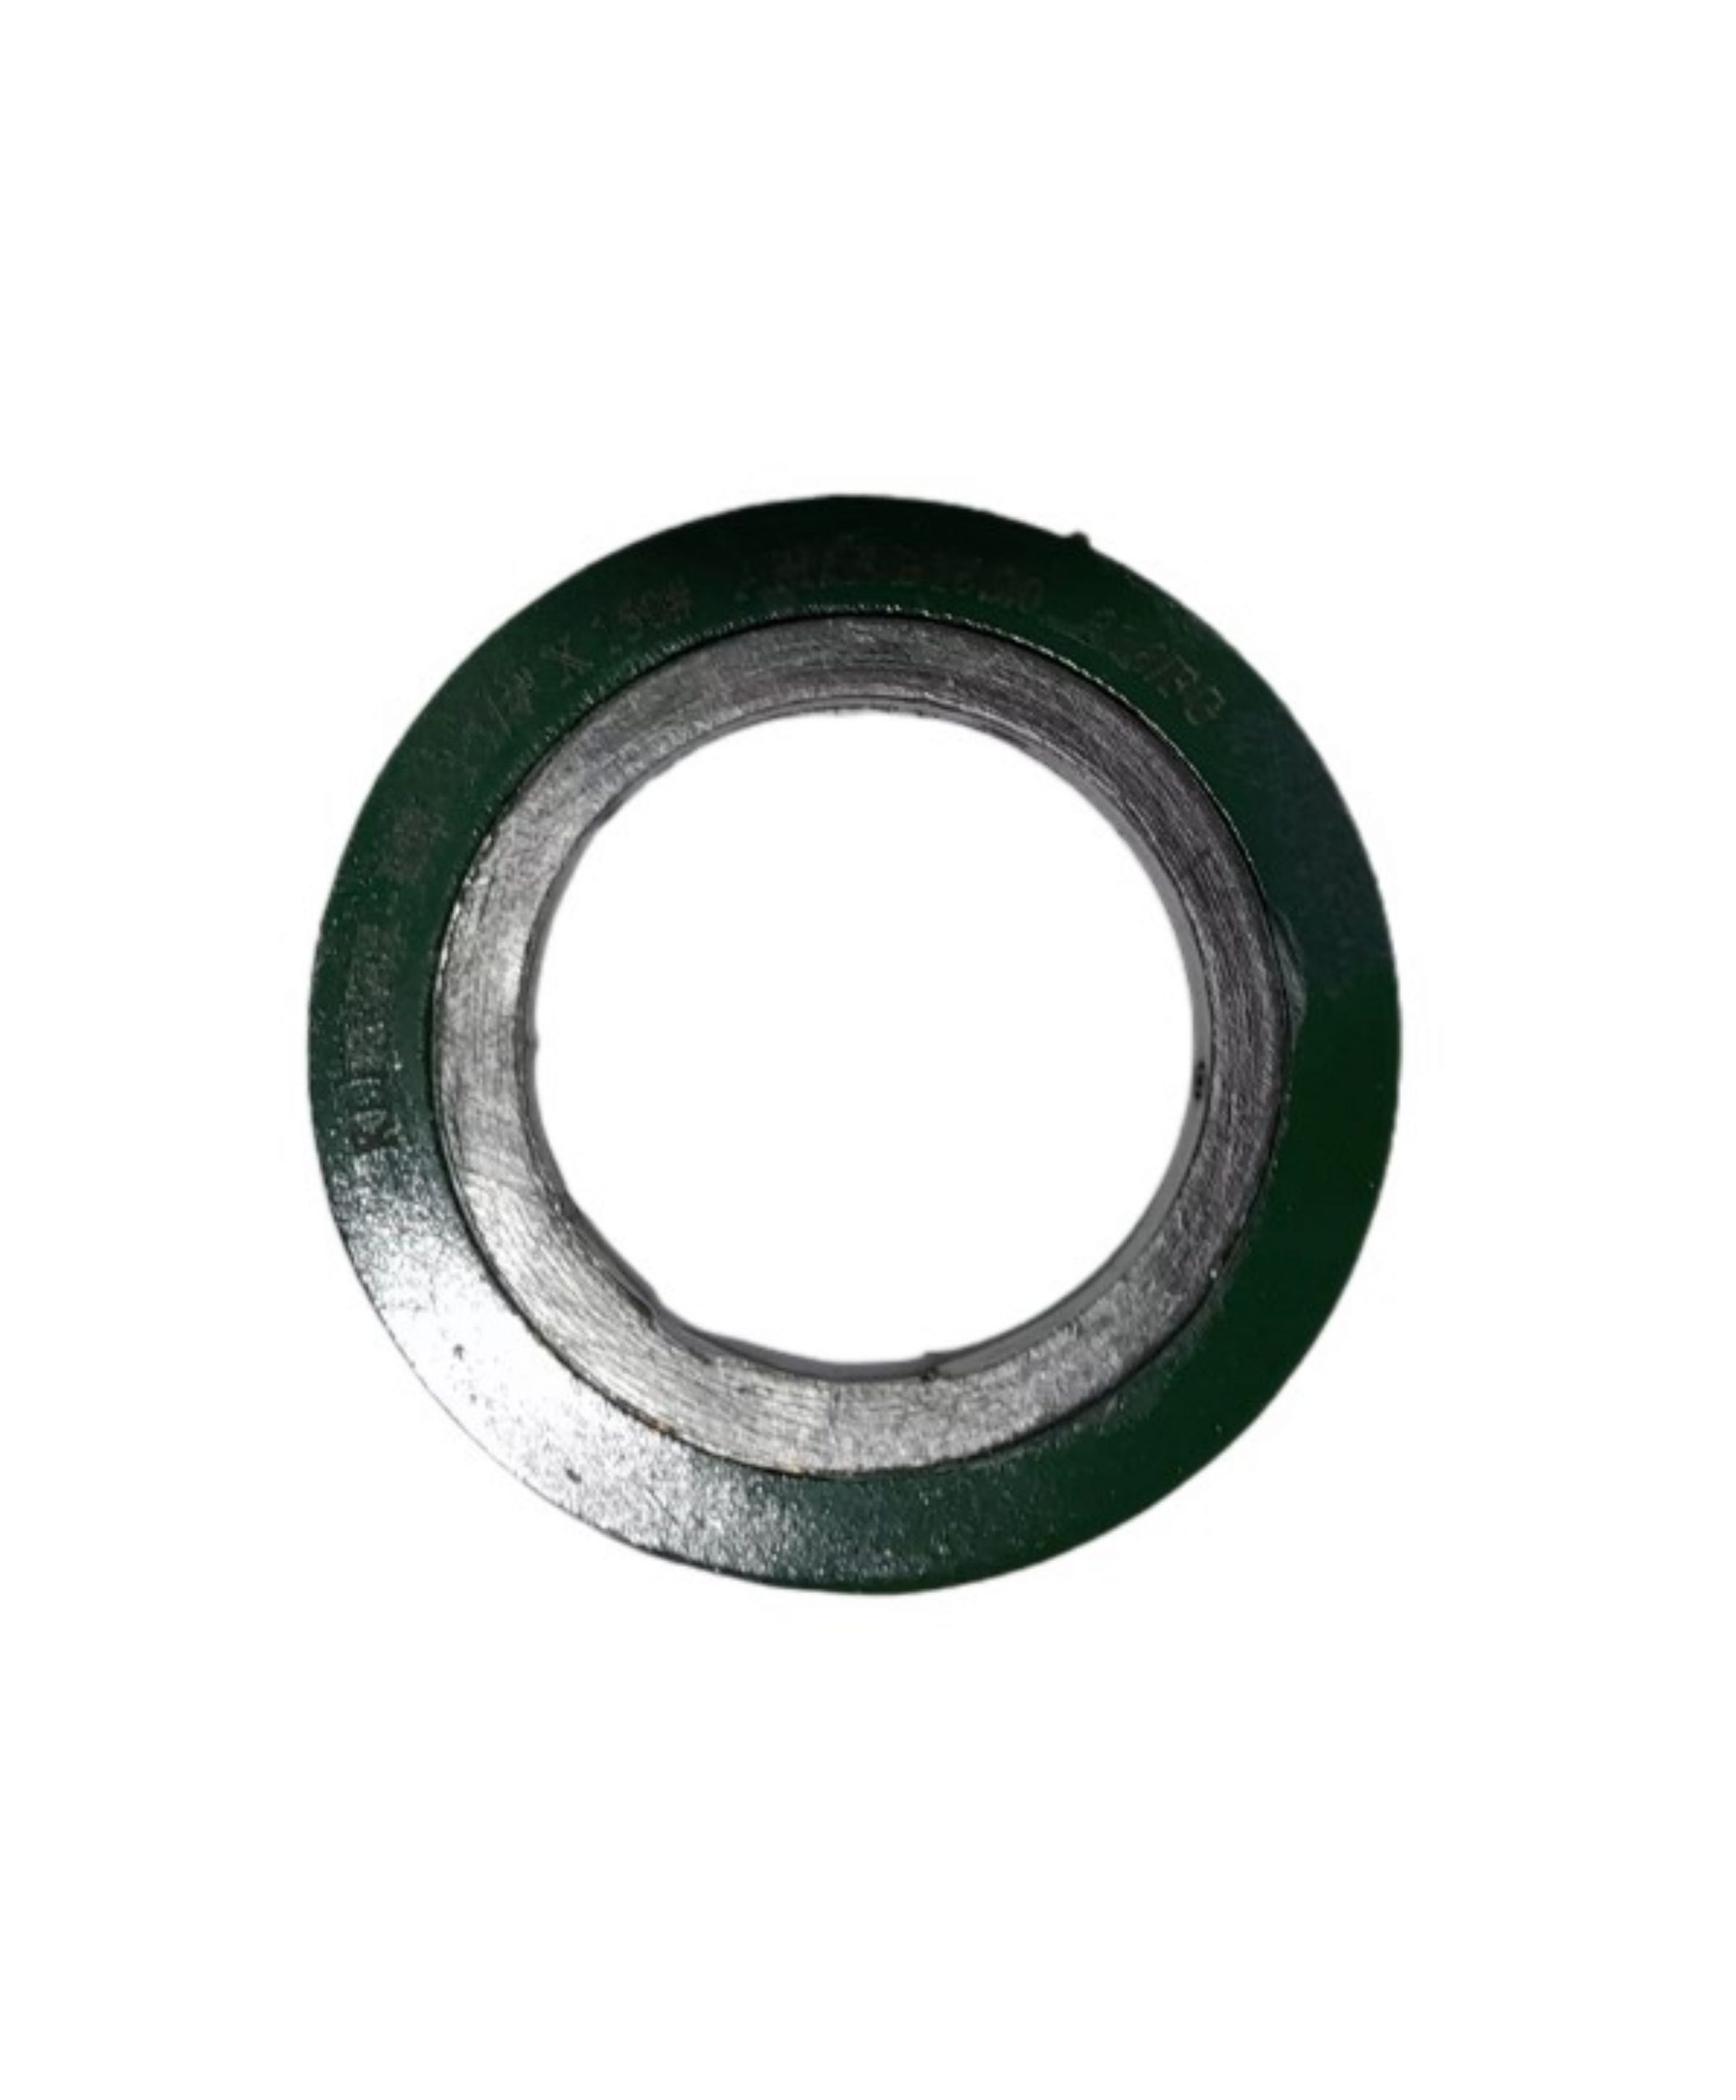 SPIRAL WOUND GASKET 1 1/4 Inches CLASS 150 SS 316L from Gas Equipment Company Llc Abu Dhabi, UNITED ARAB EMIRATES